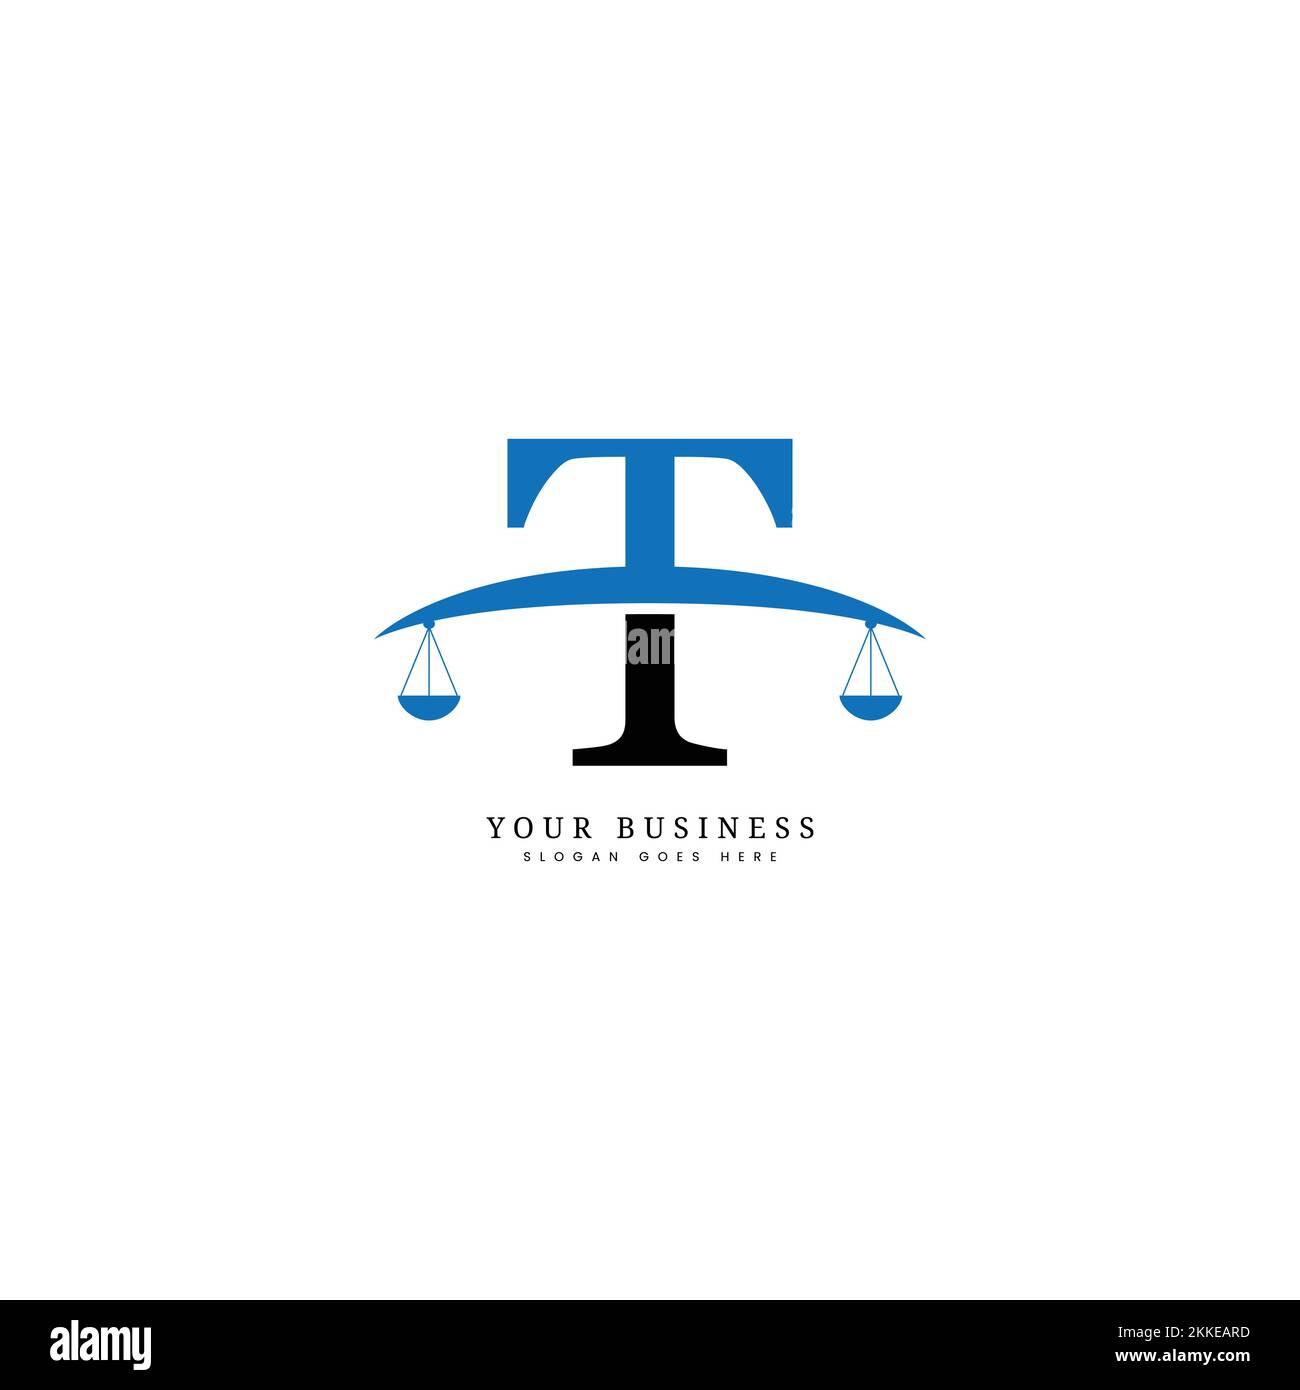 T Letter Legal Business Logo, Law firm and Attorney logo with alphabet T Vector Image template Stock Vector